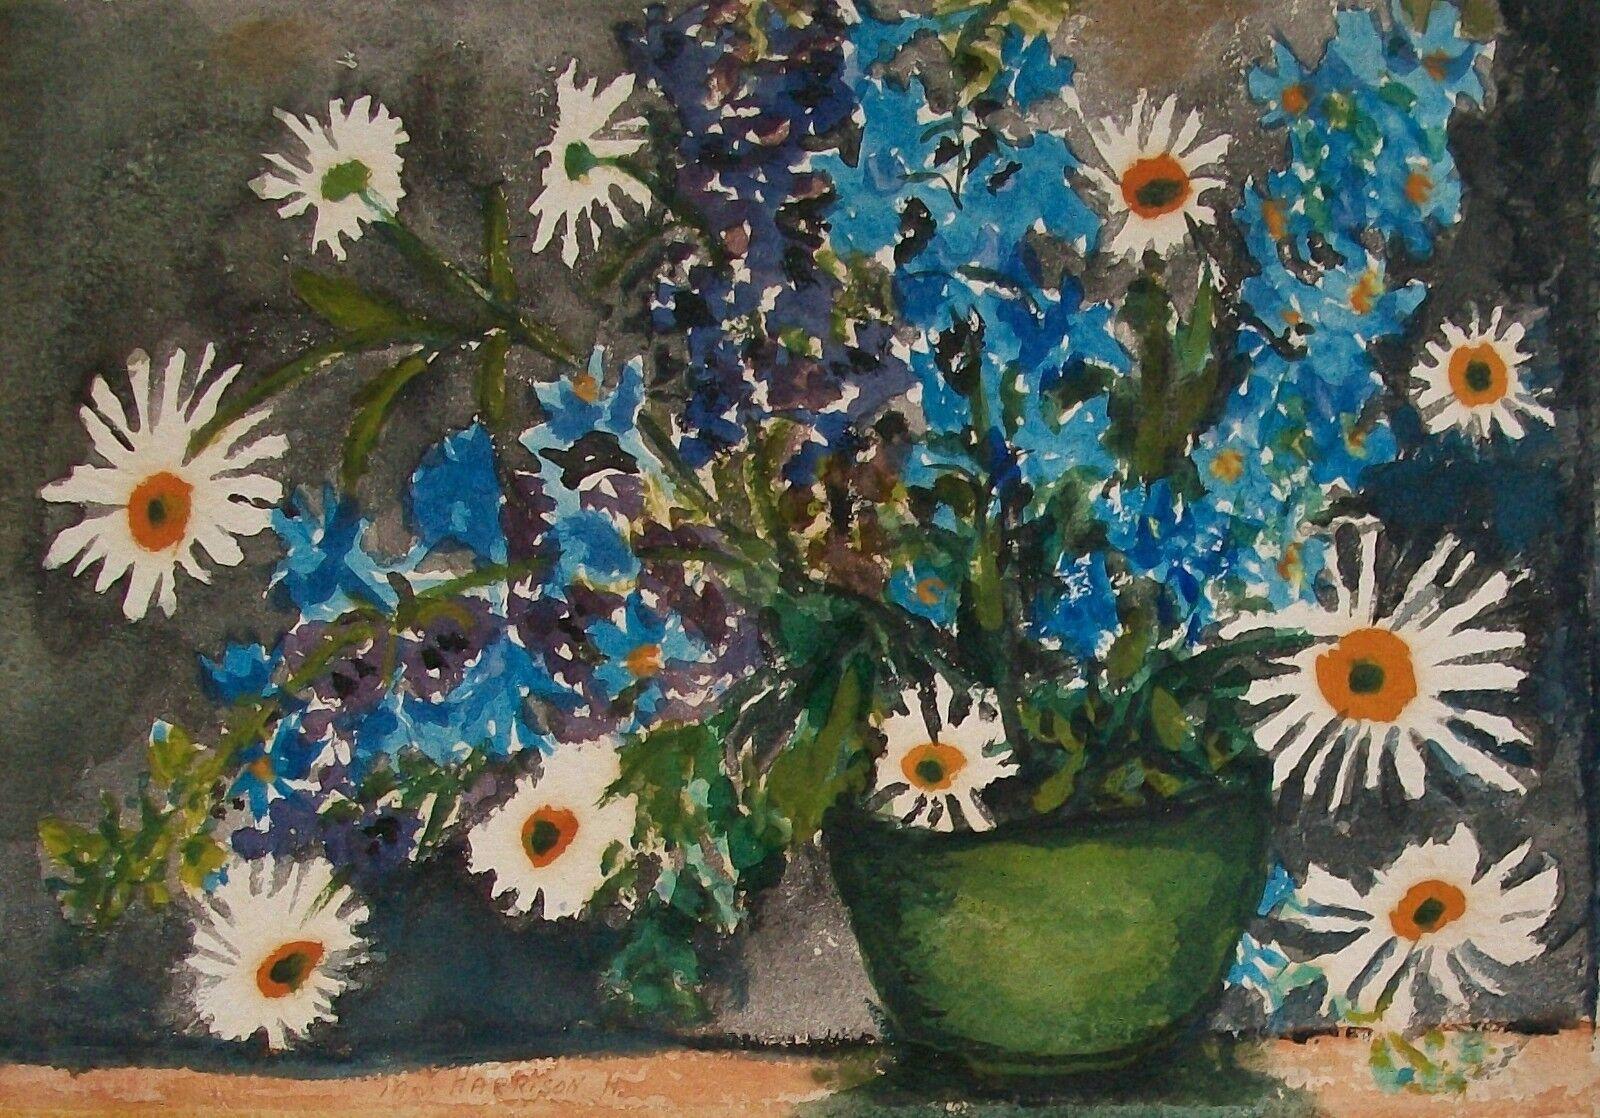 Maria Harrison (XIX-XX) - 'Delphiniums & Daisies' (Untitled) - Antique watercolor floral still life painting on paper - J. Green & Son watermark to the paper (this watermark used circa 1875 to 1913) - signed lower left - contained in a vintage matte